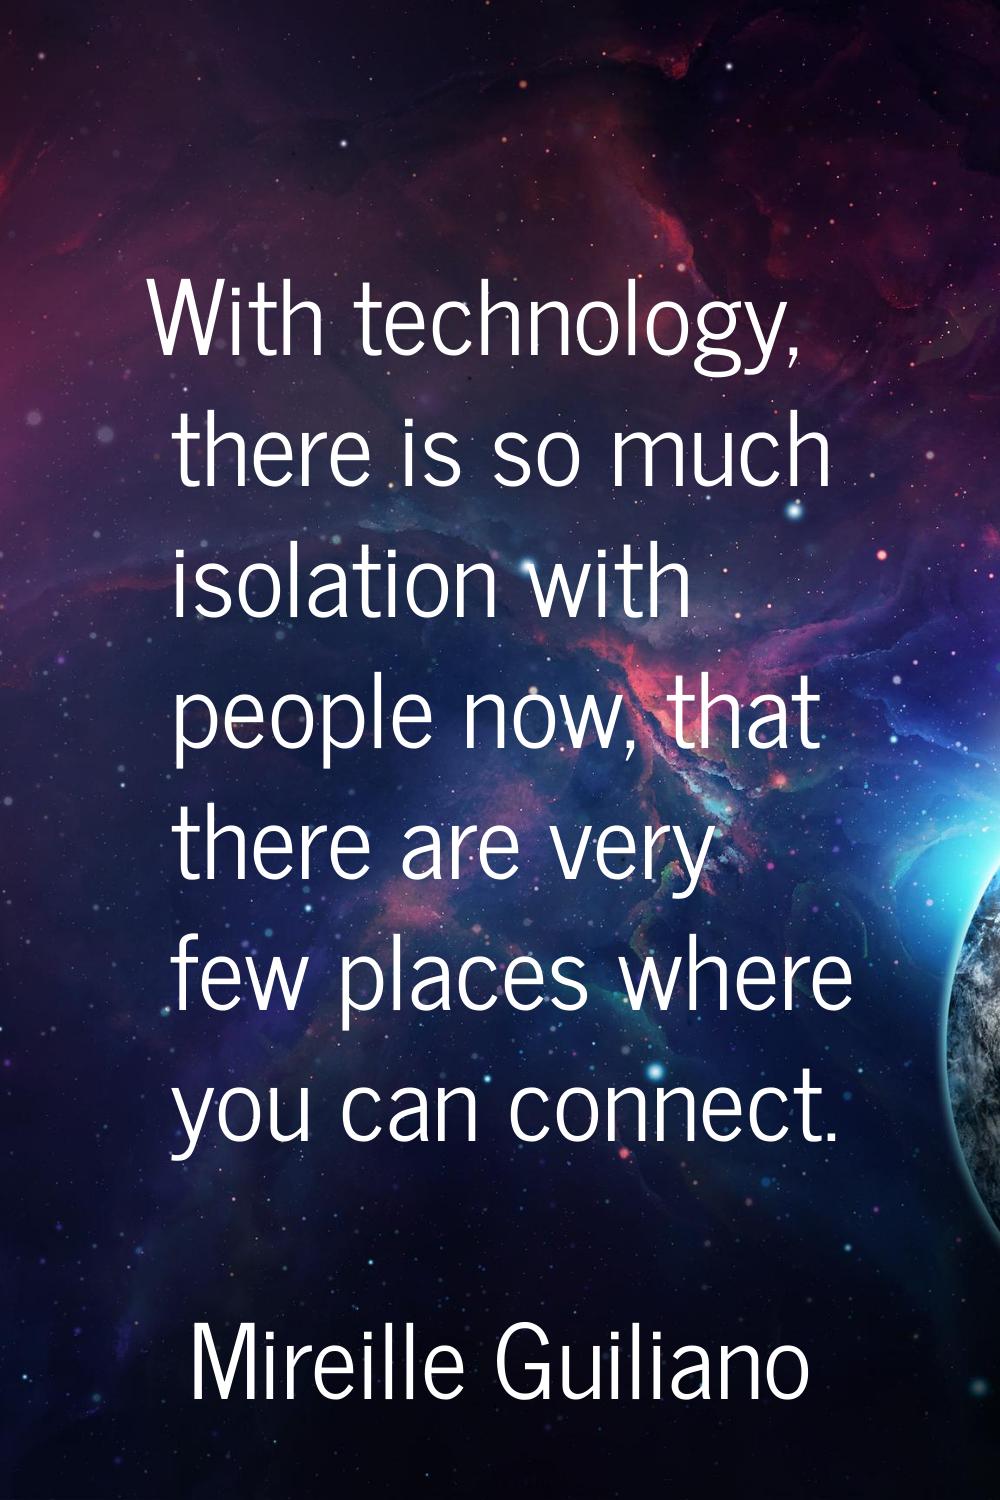 With technology, there is so much isolation with people now, that there are very few places where y